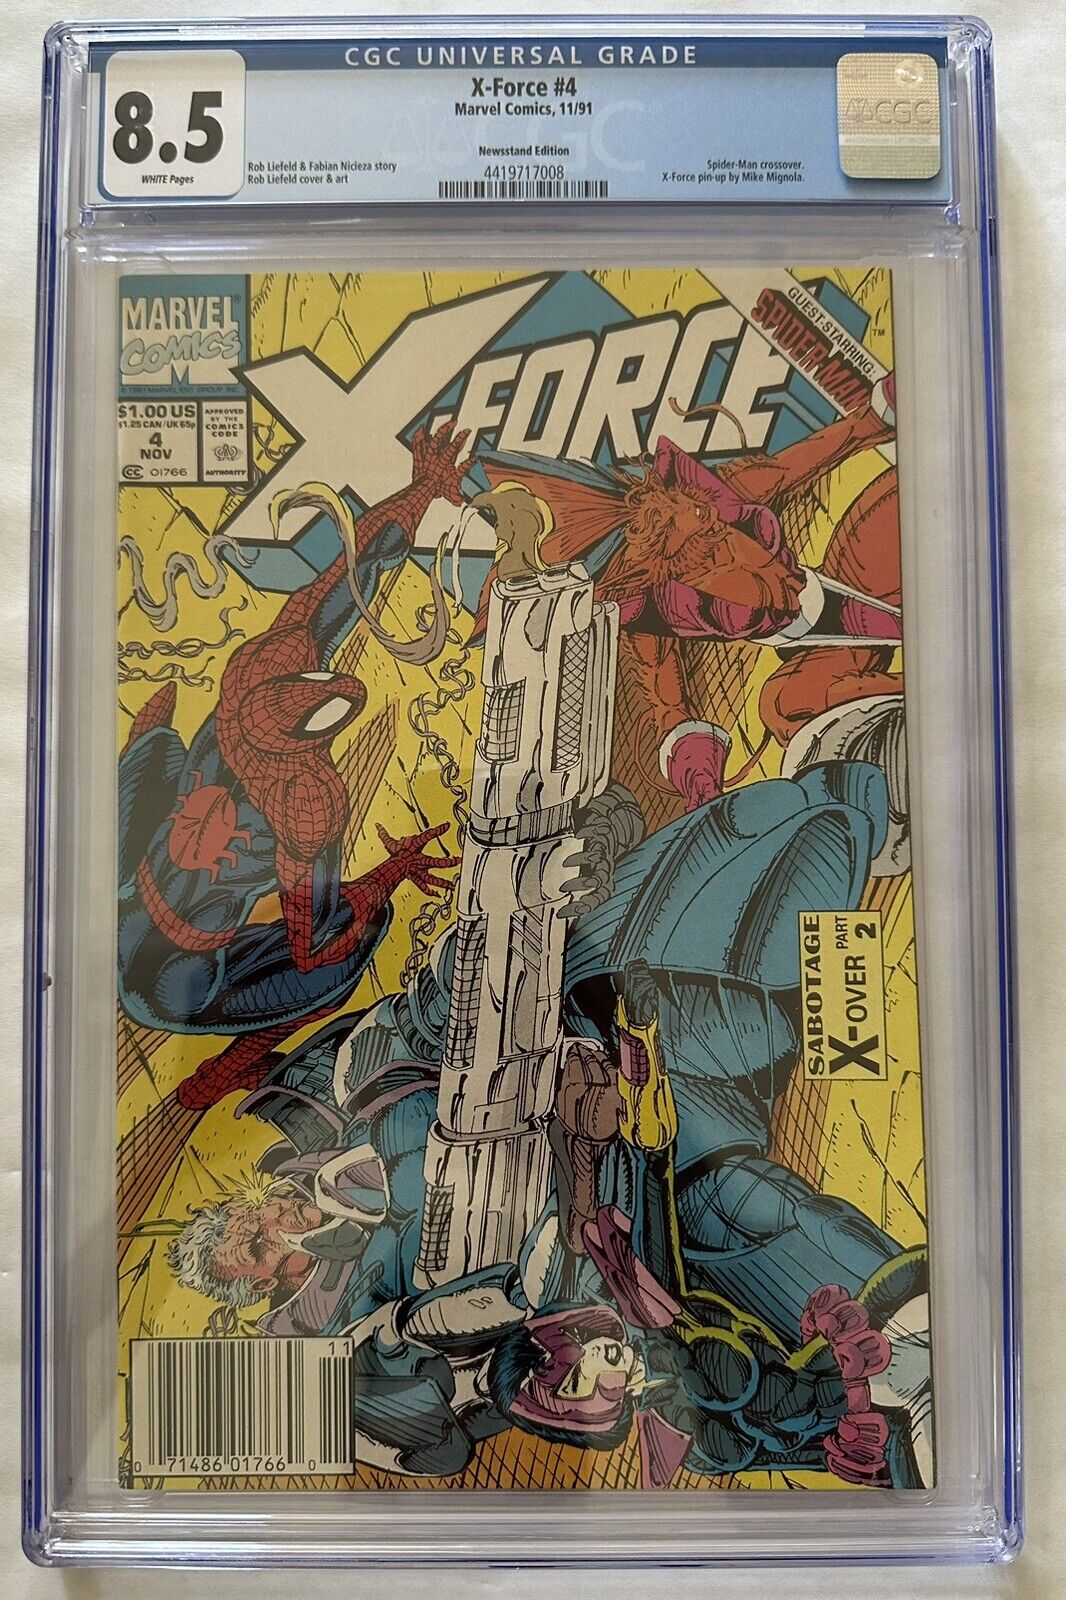 X-Force #4 CGC 8.5 (1991) - Spider-Man crossover - Rob Liefeld